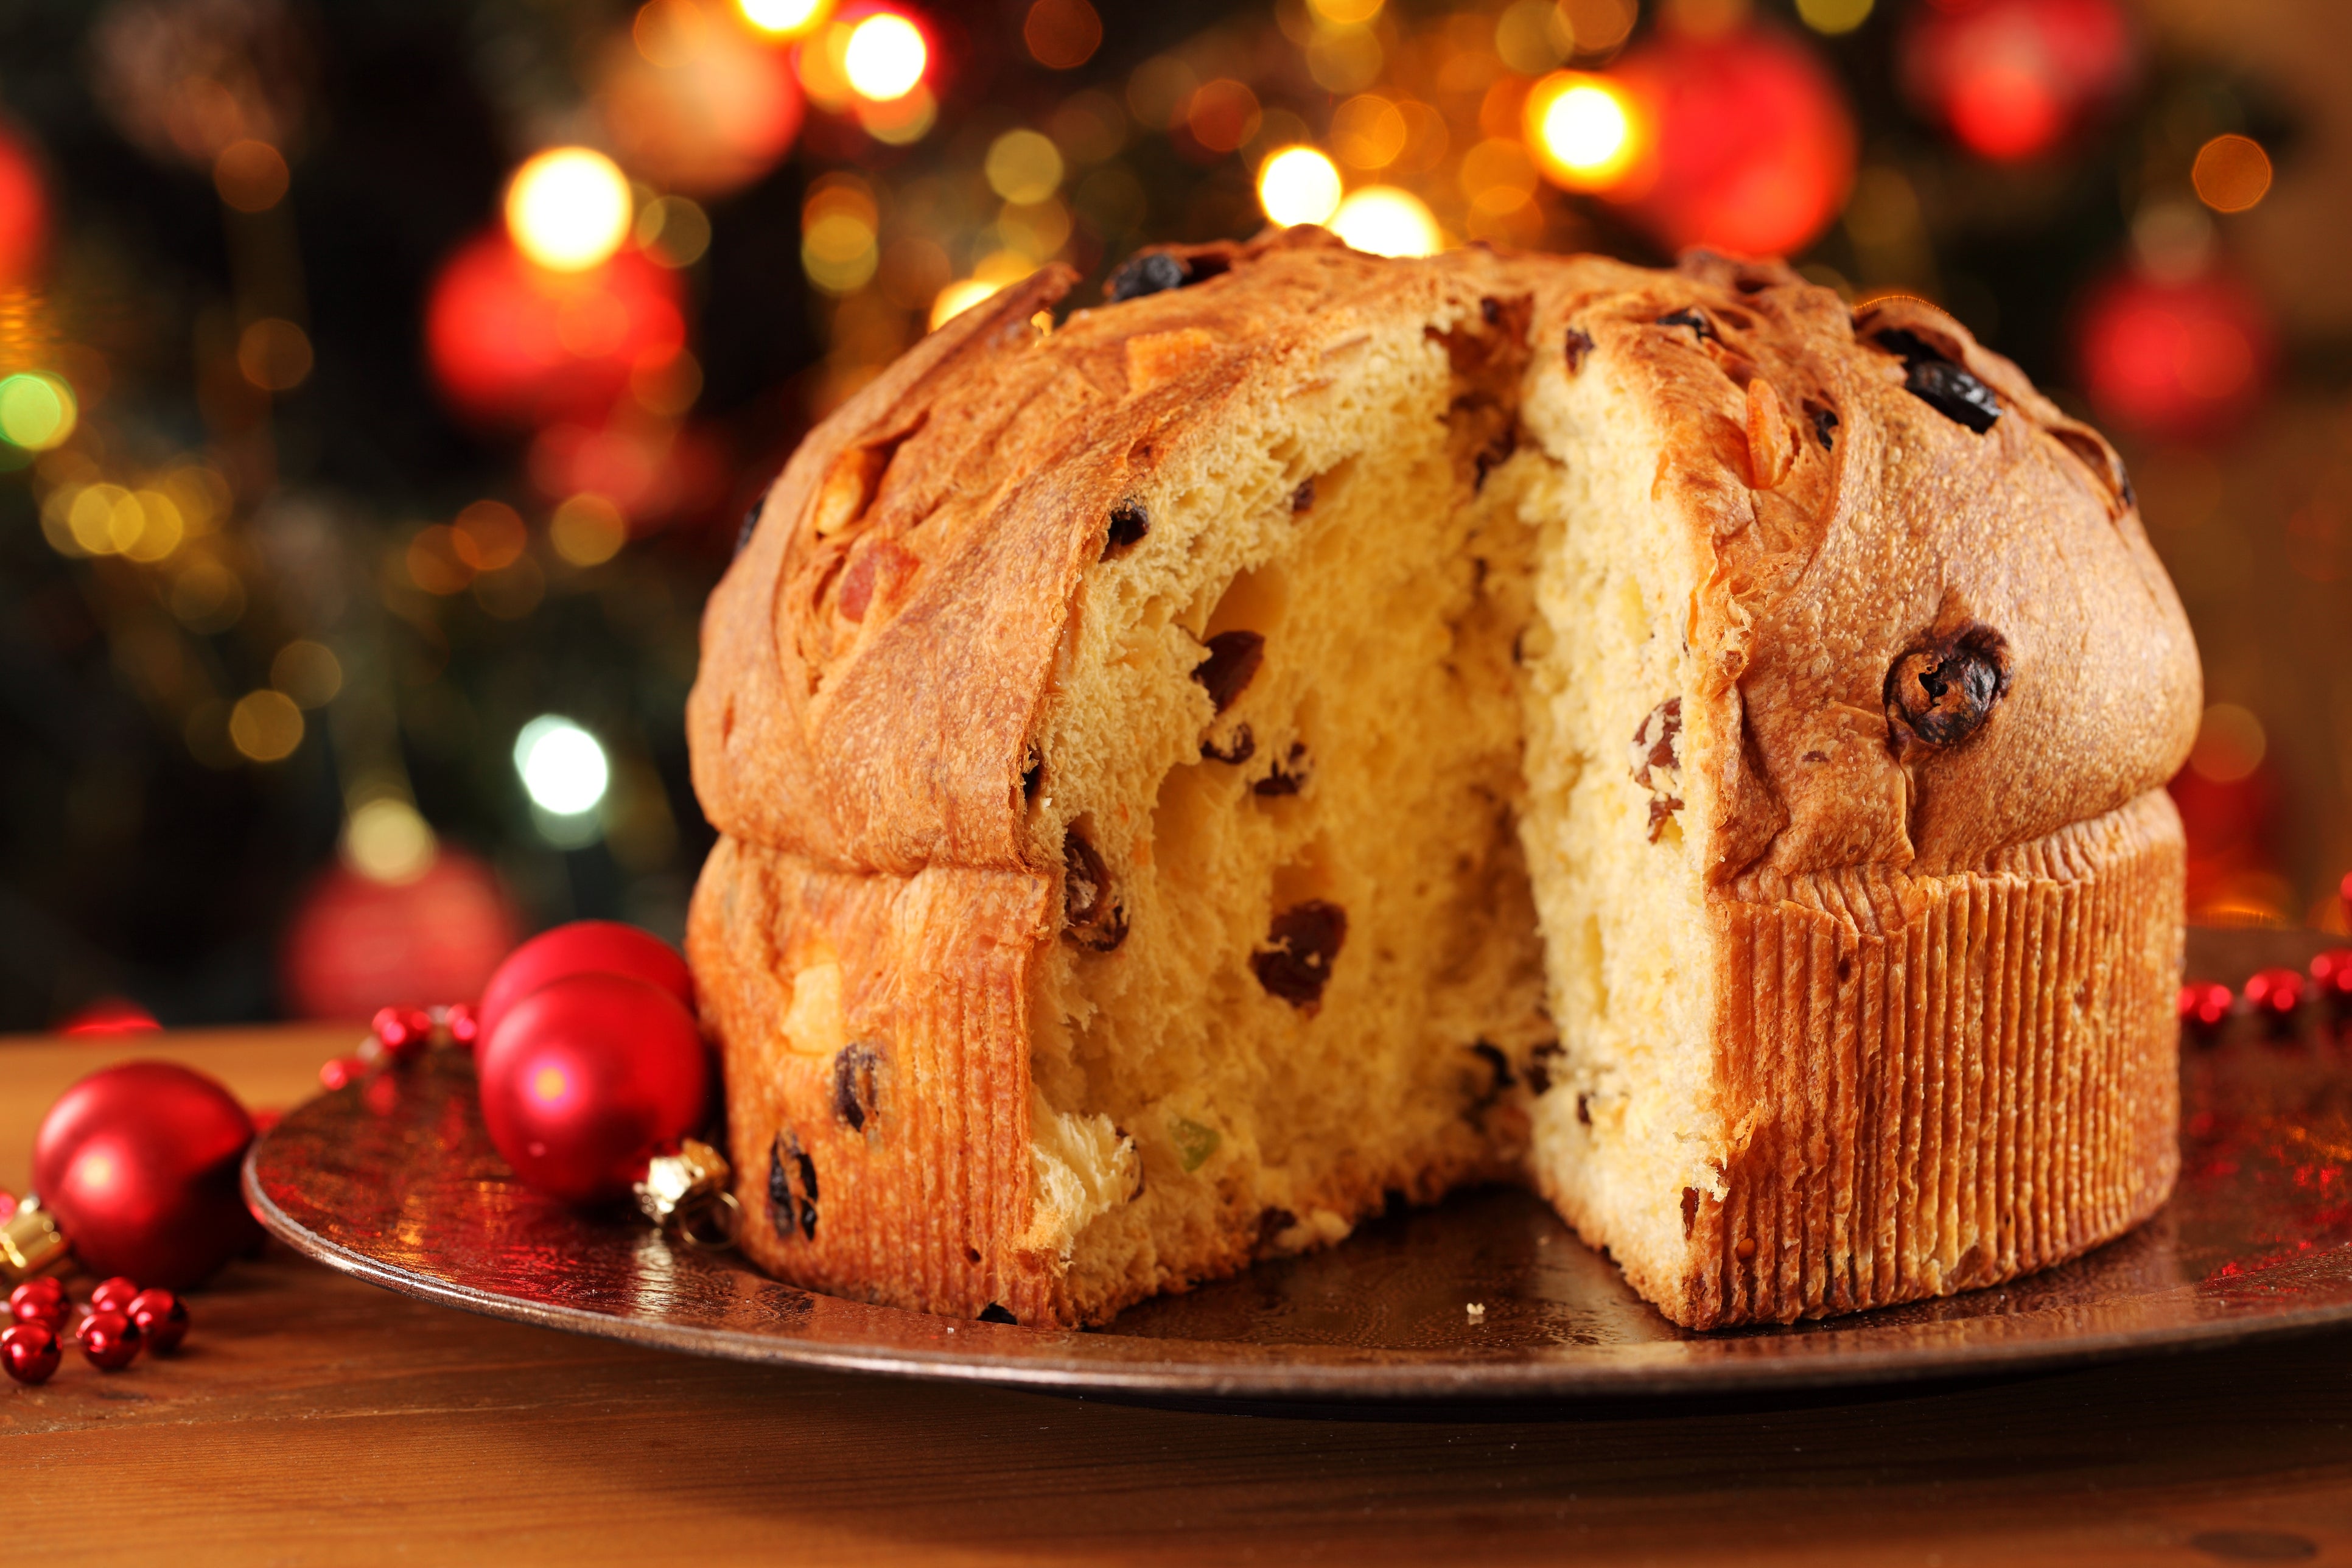 The sweet bread is part of the Italian Christmas tradition